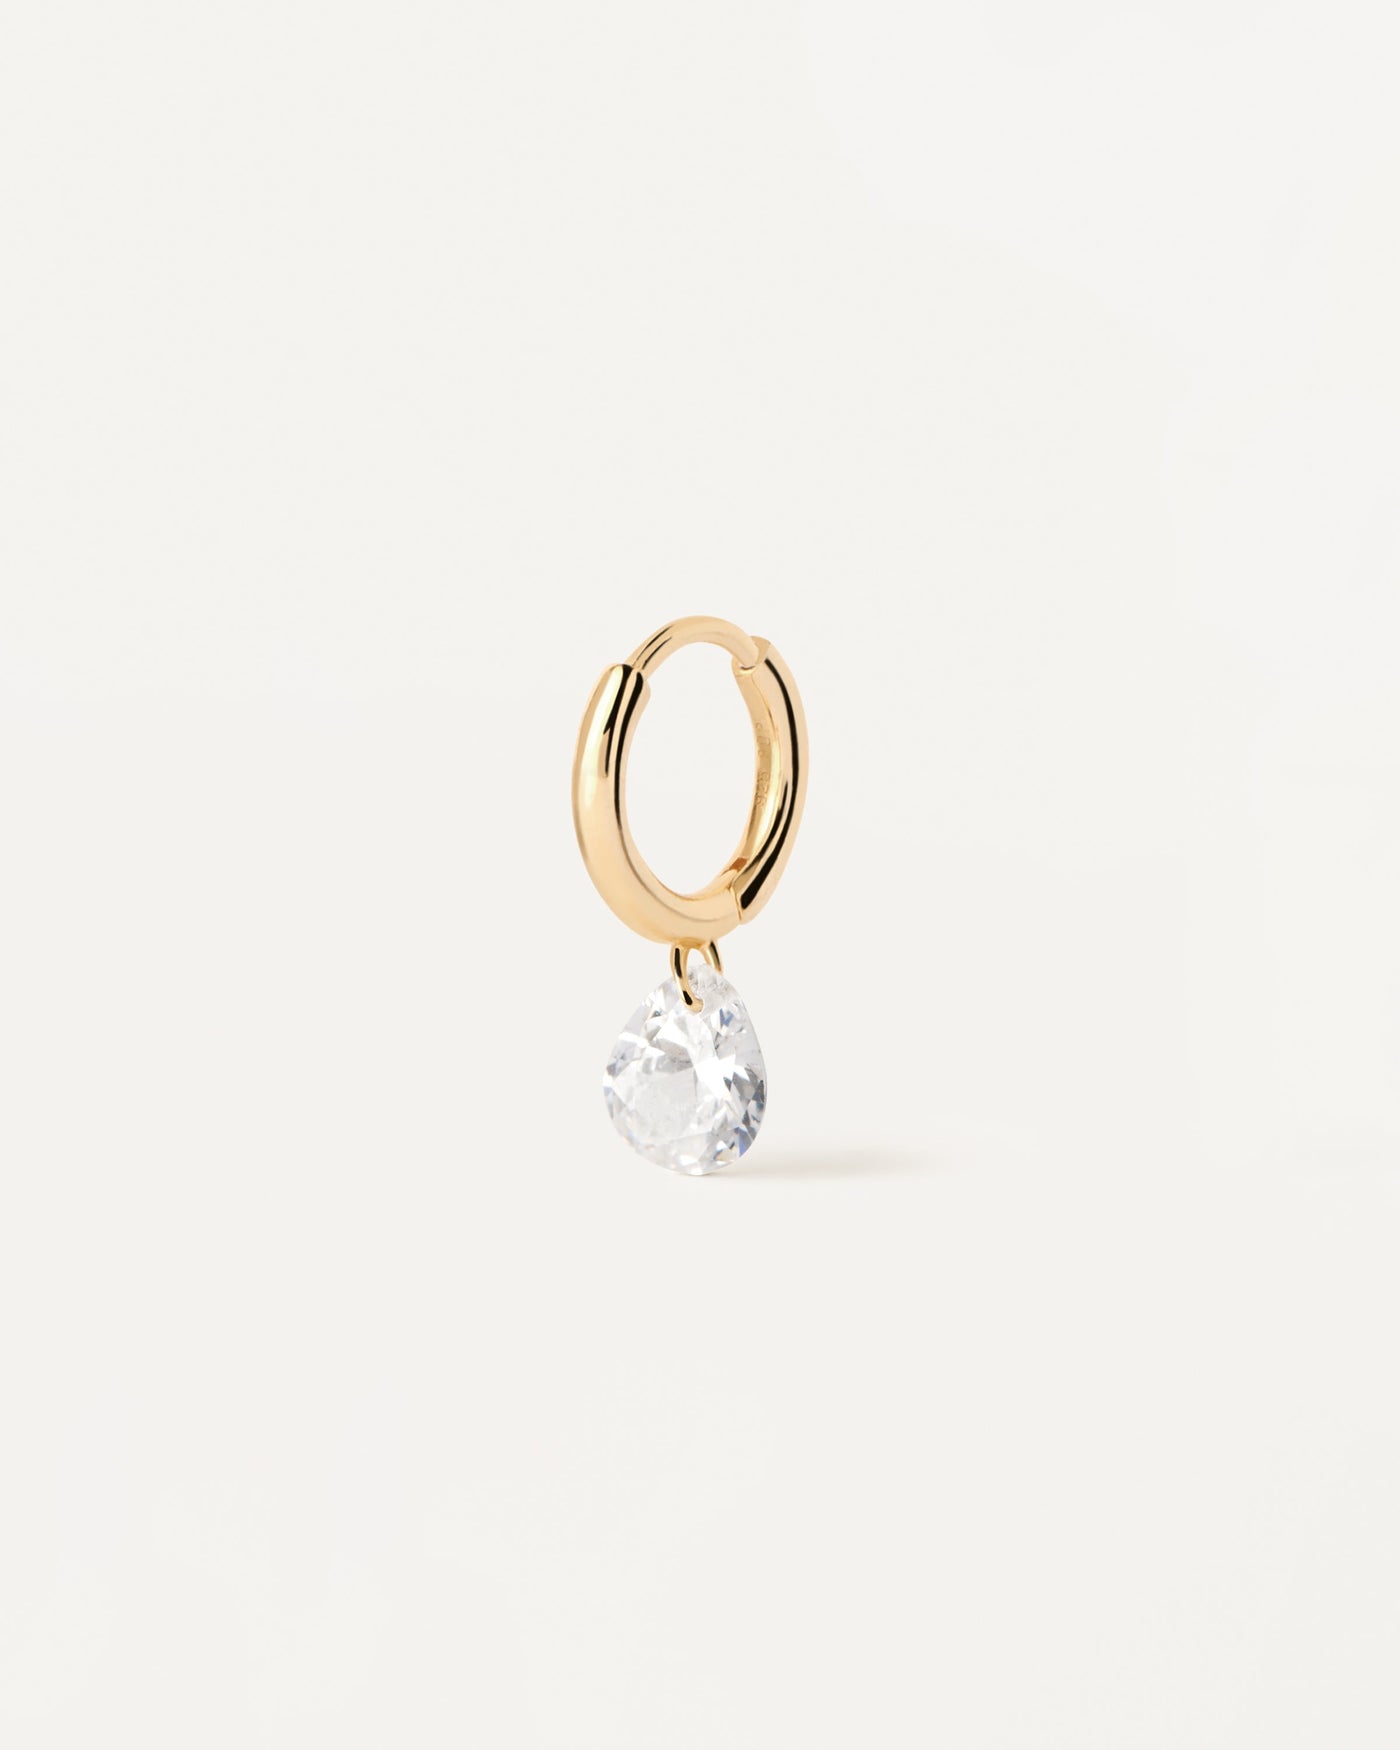 2023 Selection | Aqua Single Hoop Earring. Gold-plated silver ear piercing with white zirconia drop pendant. Get the latest arrival from PDPAOLA. Place your order safely and get this Best Seller. Free Shipping.